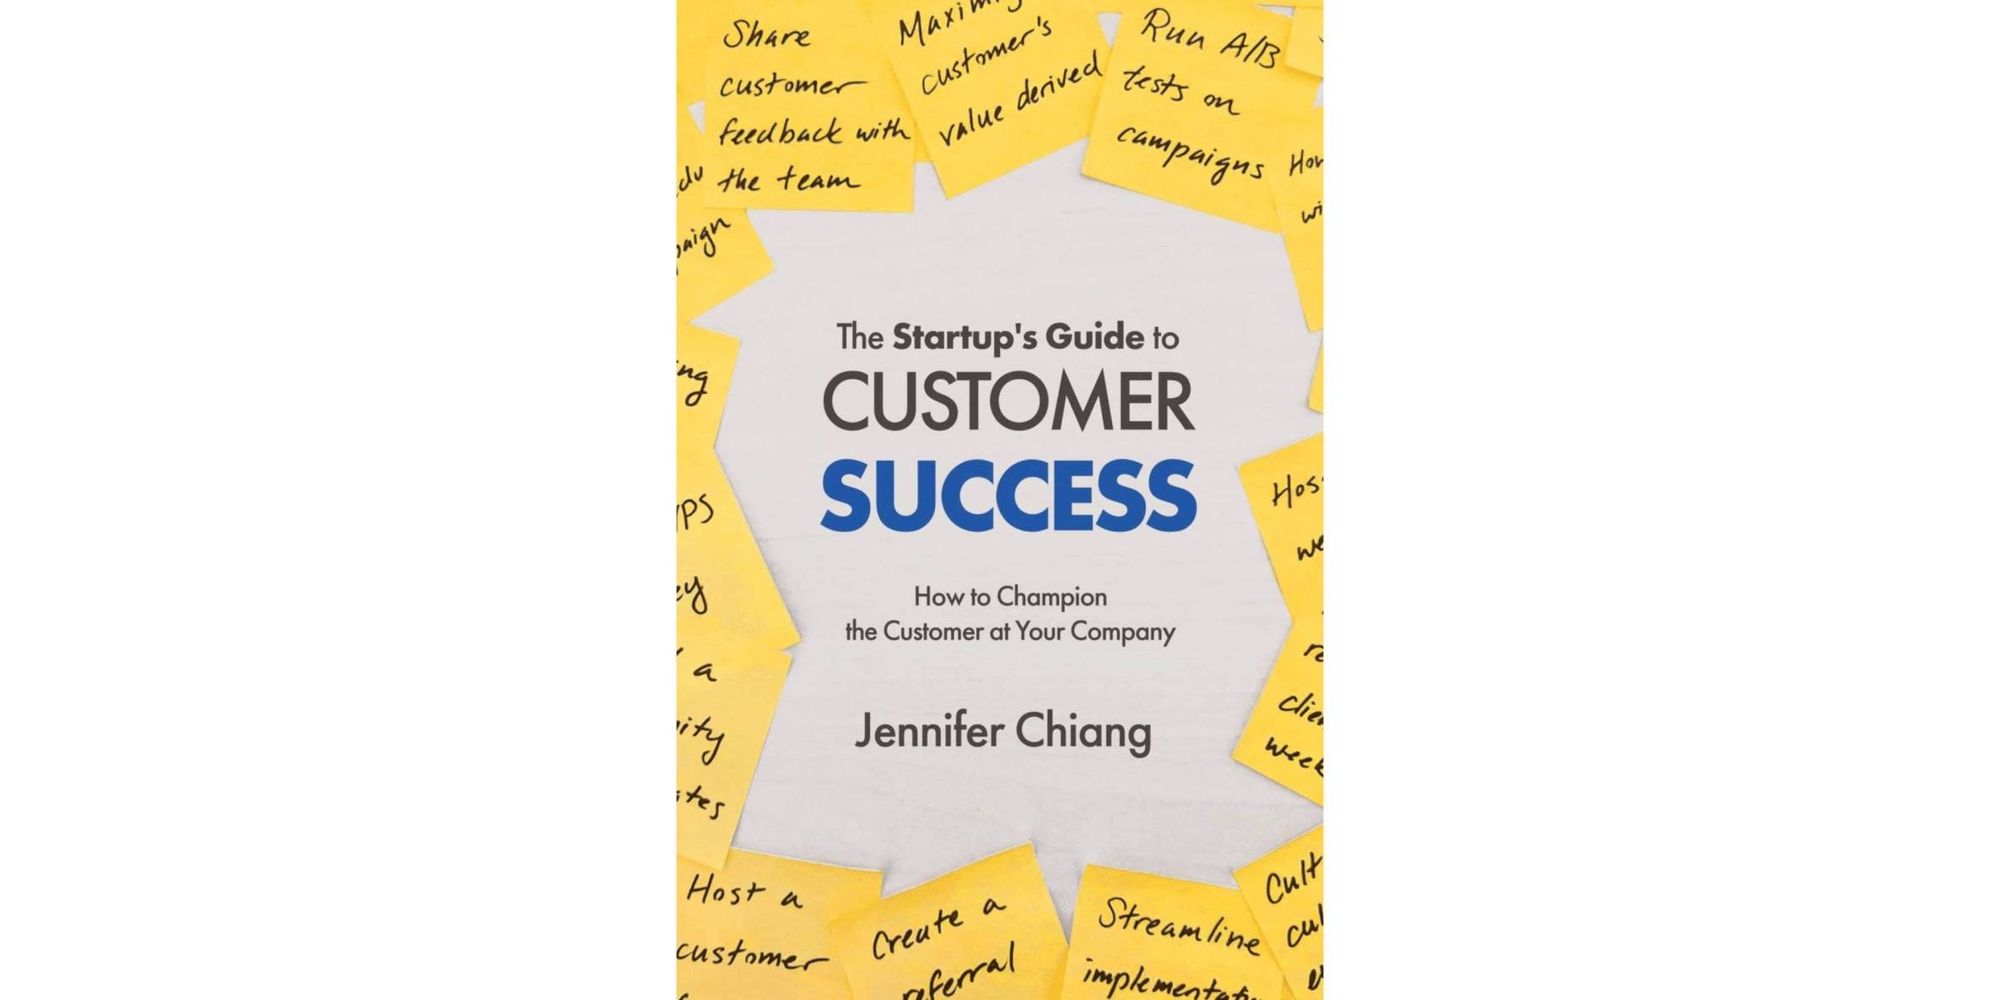 The Startup's Guide to Customer Success: How to Champion the Customer at Your Company